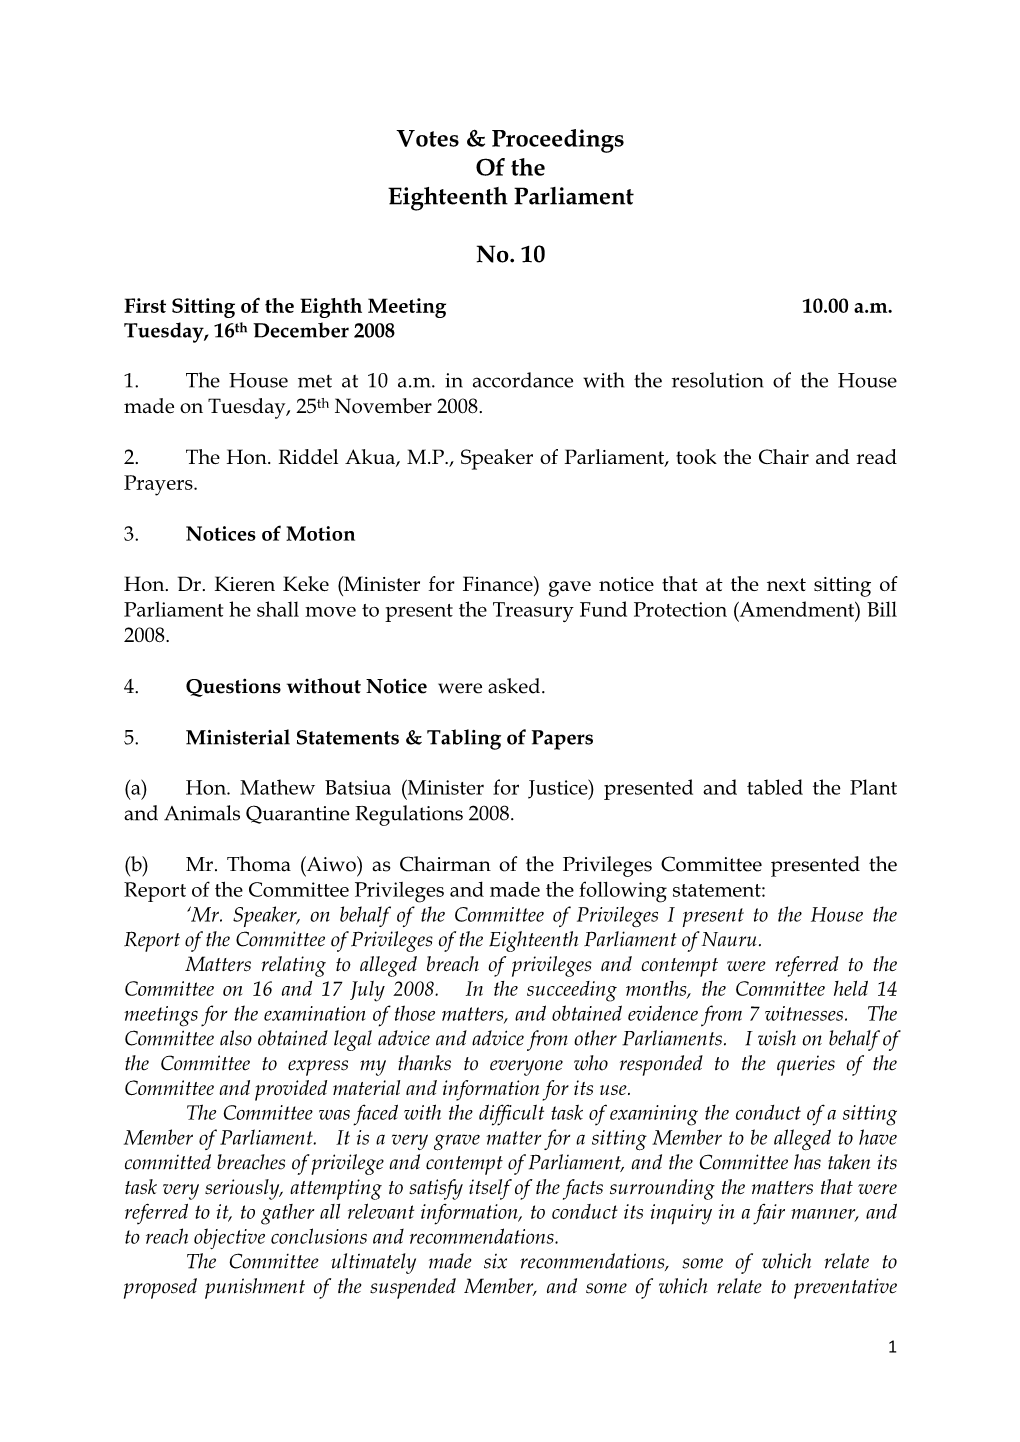 Votes & Proceedings of the Eighteenth Parliament No. 10